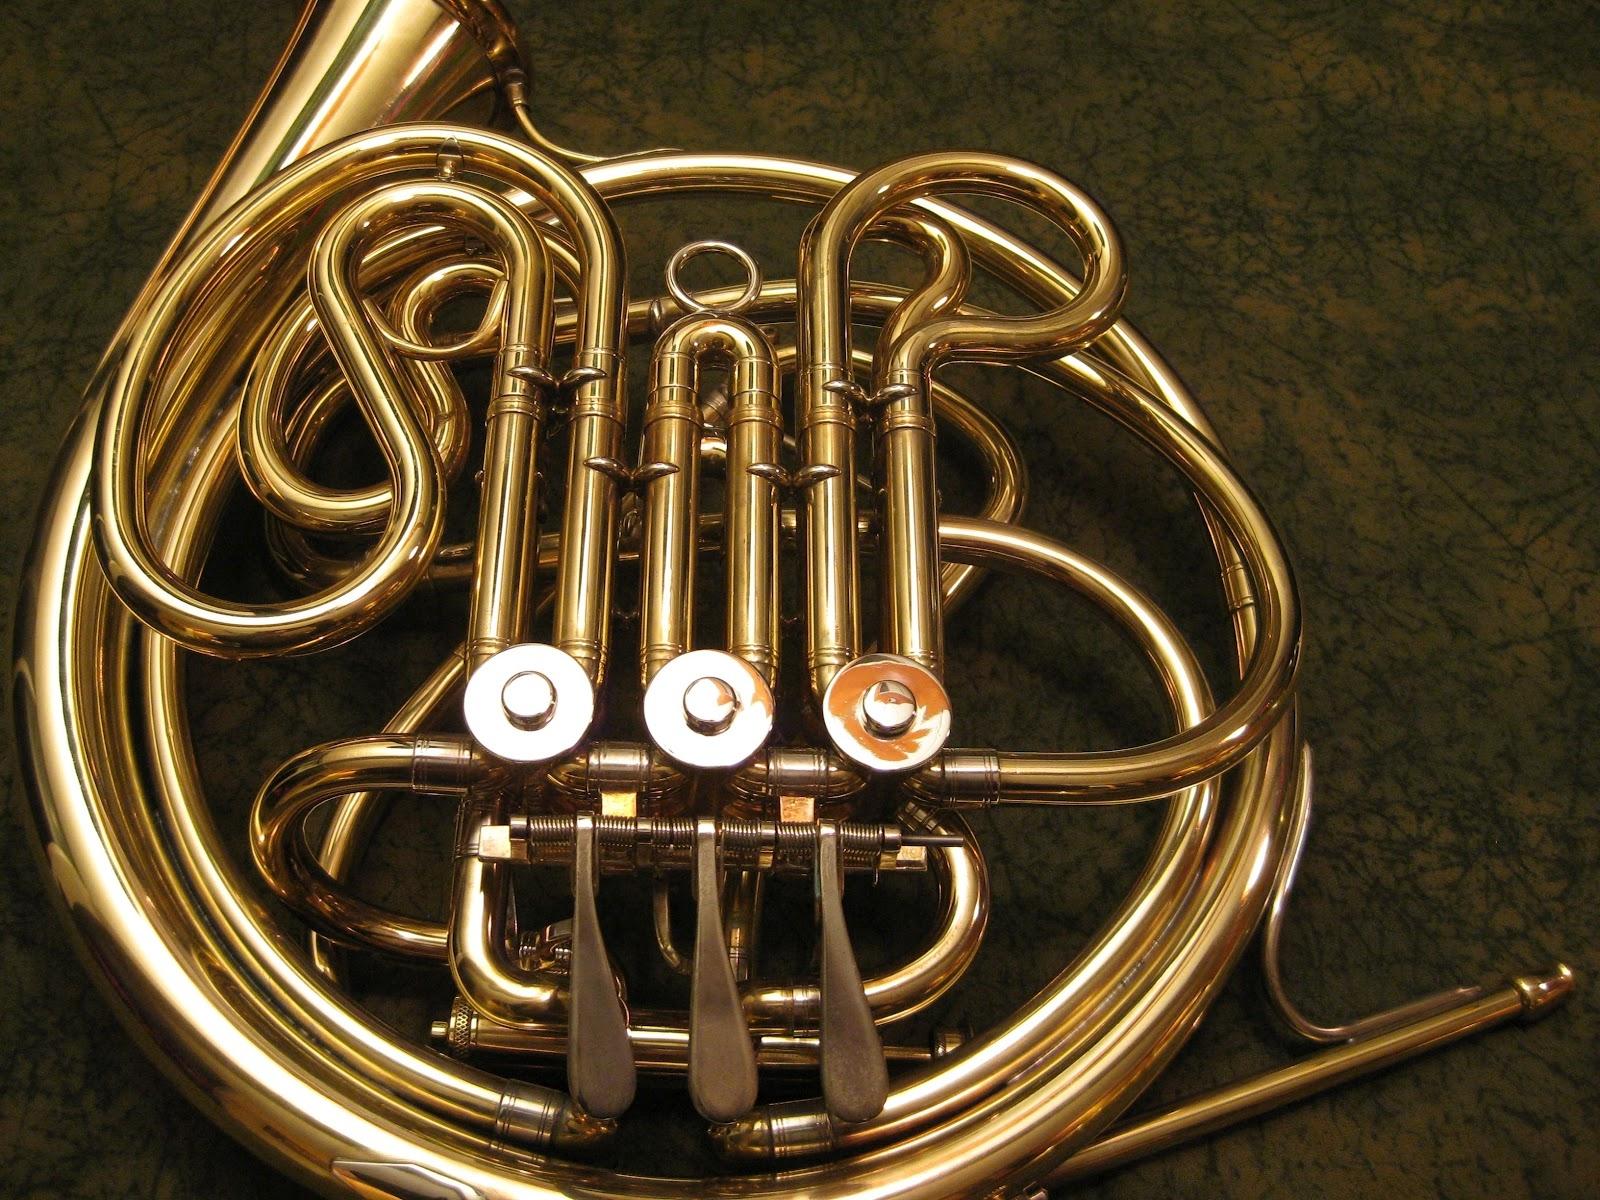 French horn HD Wallpaper